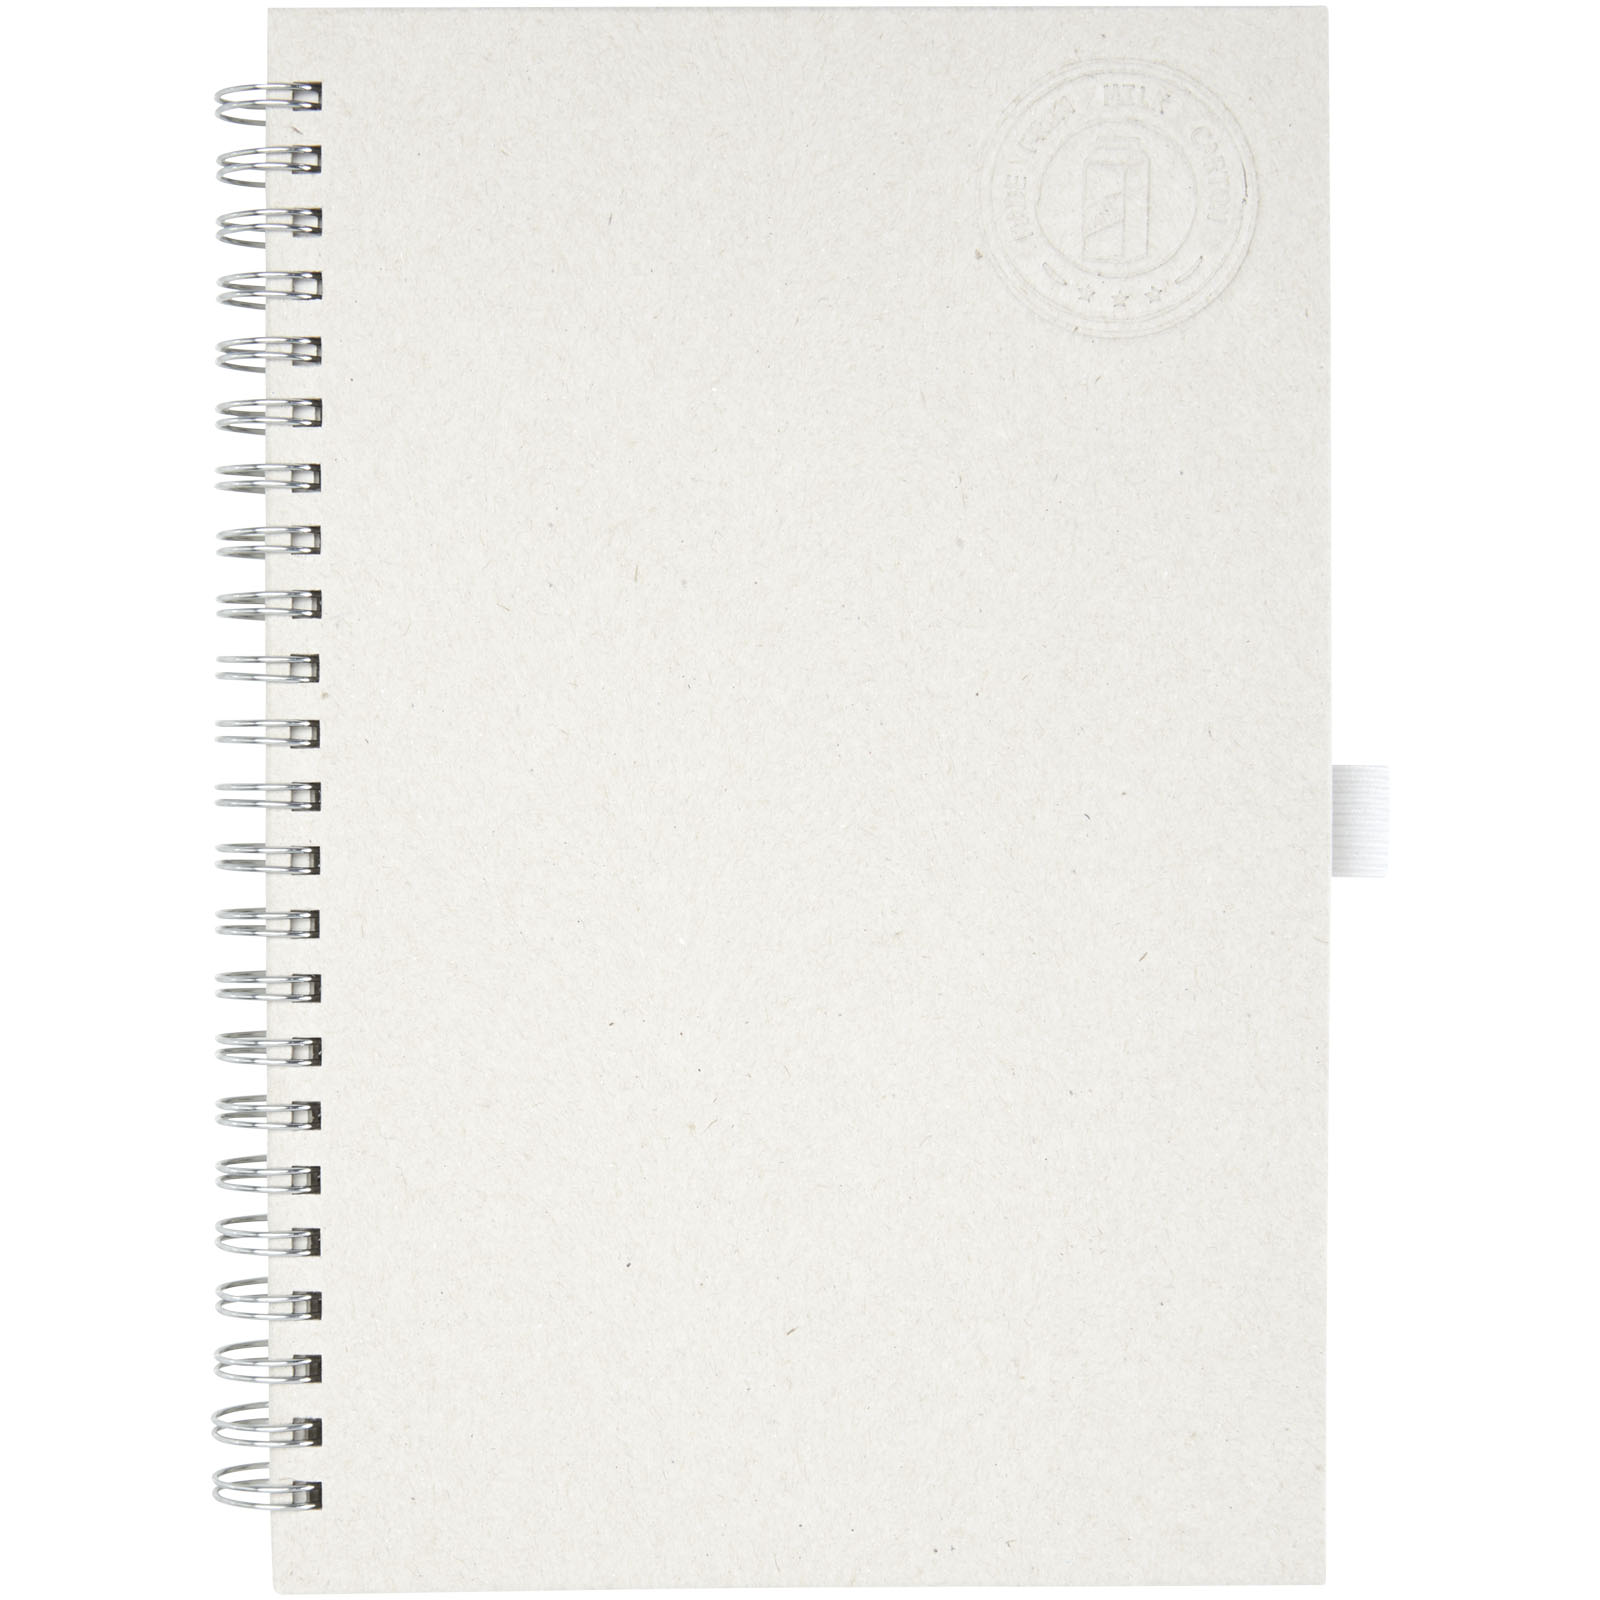 Advertising Hard cover notebooks - Dairy Dream A5 size reference recycled milk cartons spiral notebook - 1